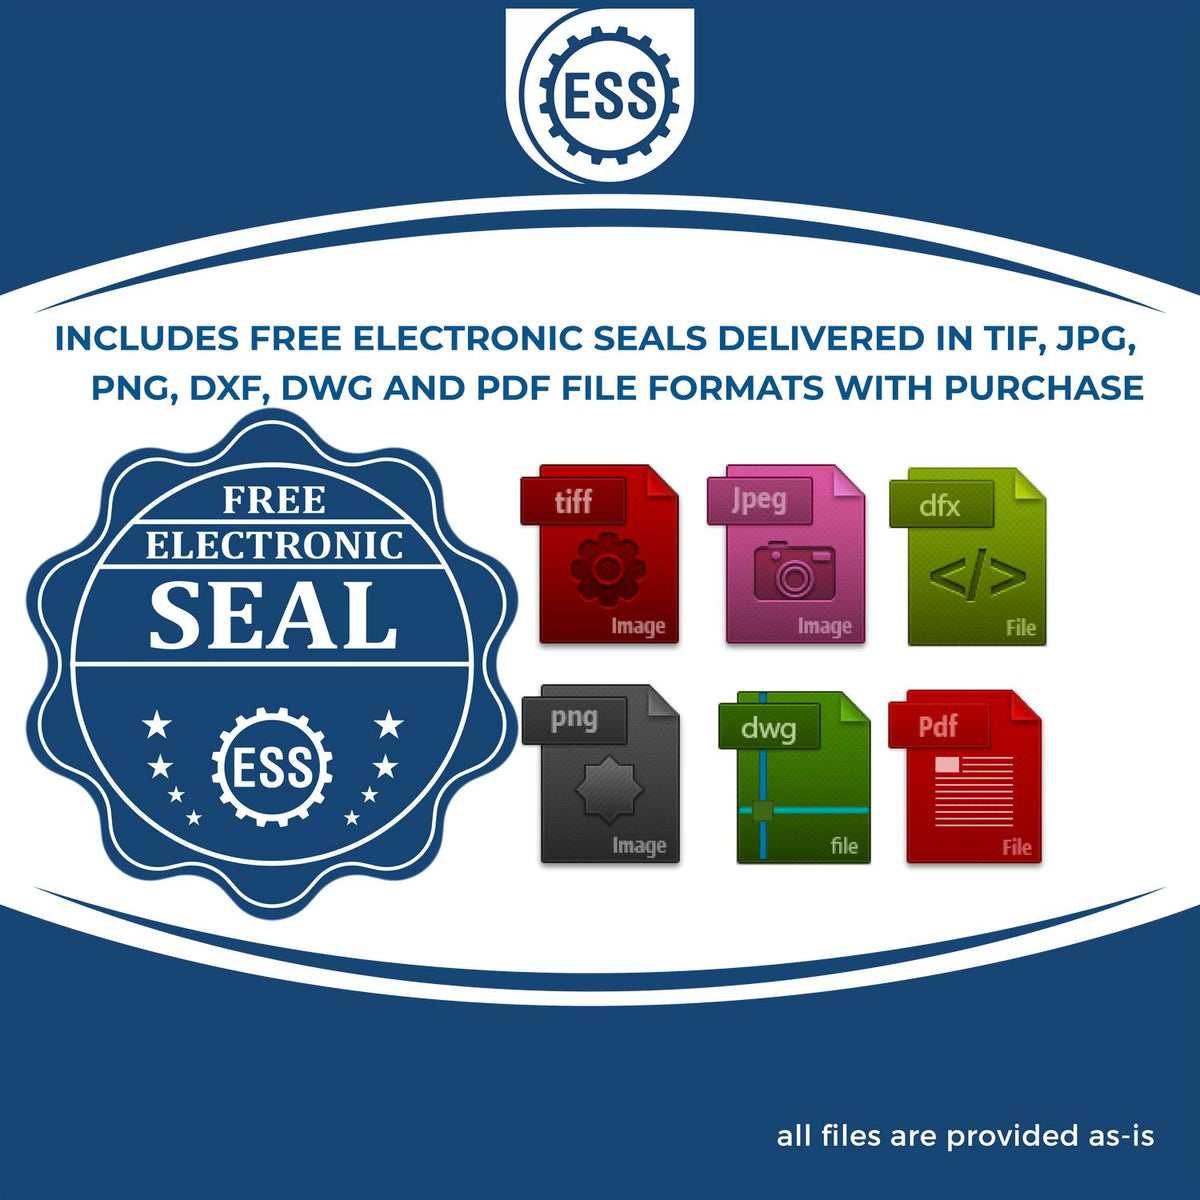 An infographic for the free electronic seal for the Wooden Handle Wisconsin State Seal Notary Public Stamp illustrating the different file type icons such as DXF, DWG, TIF, JPG and PNG.